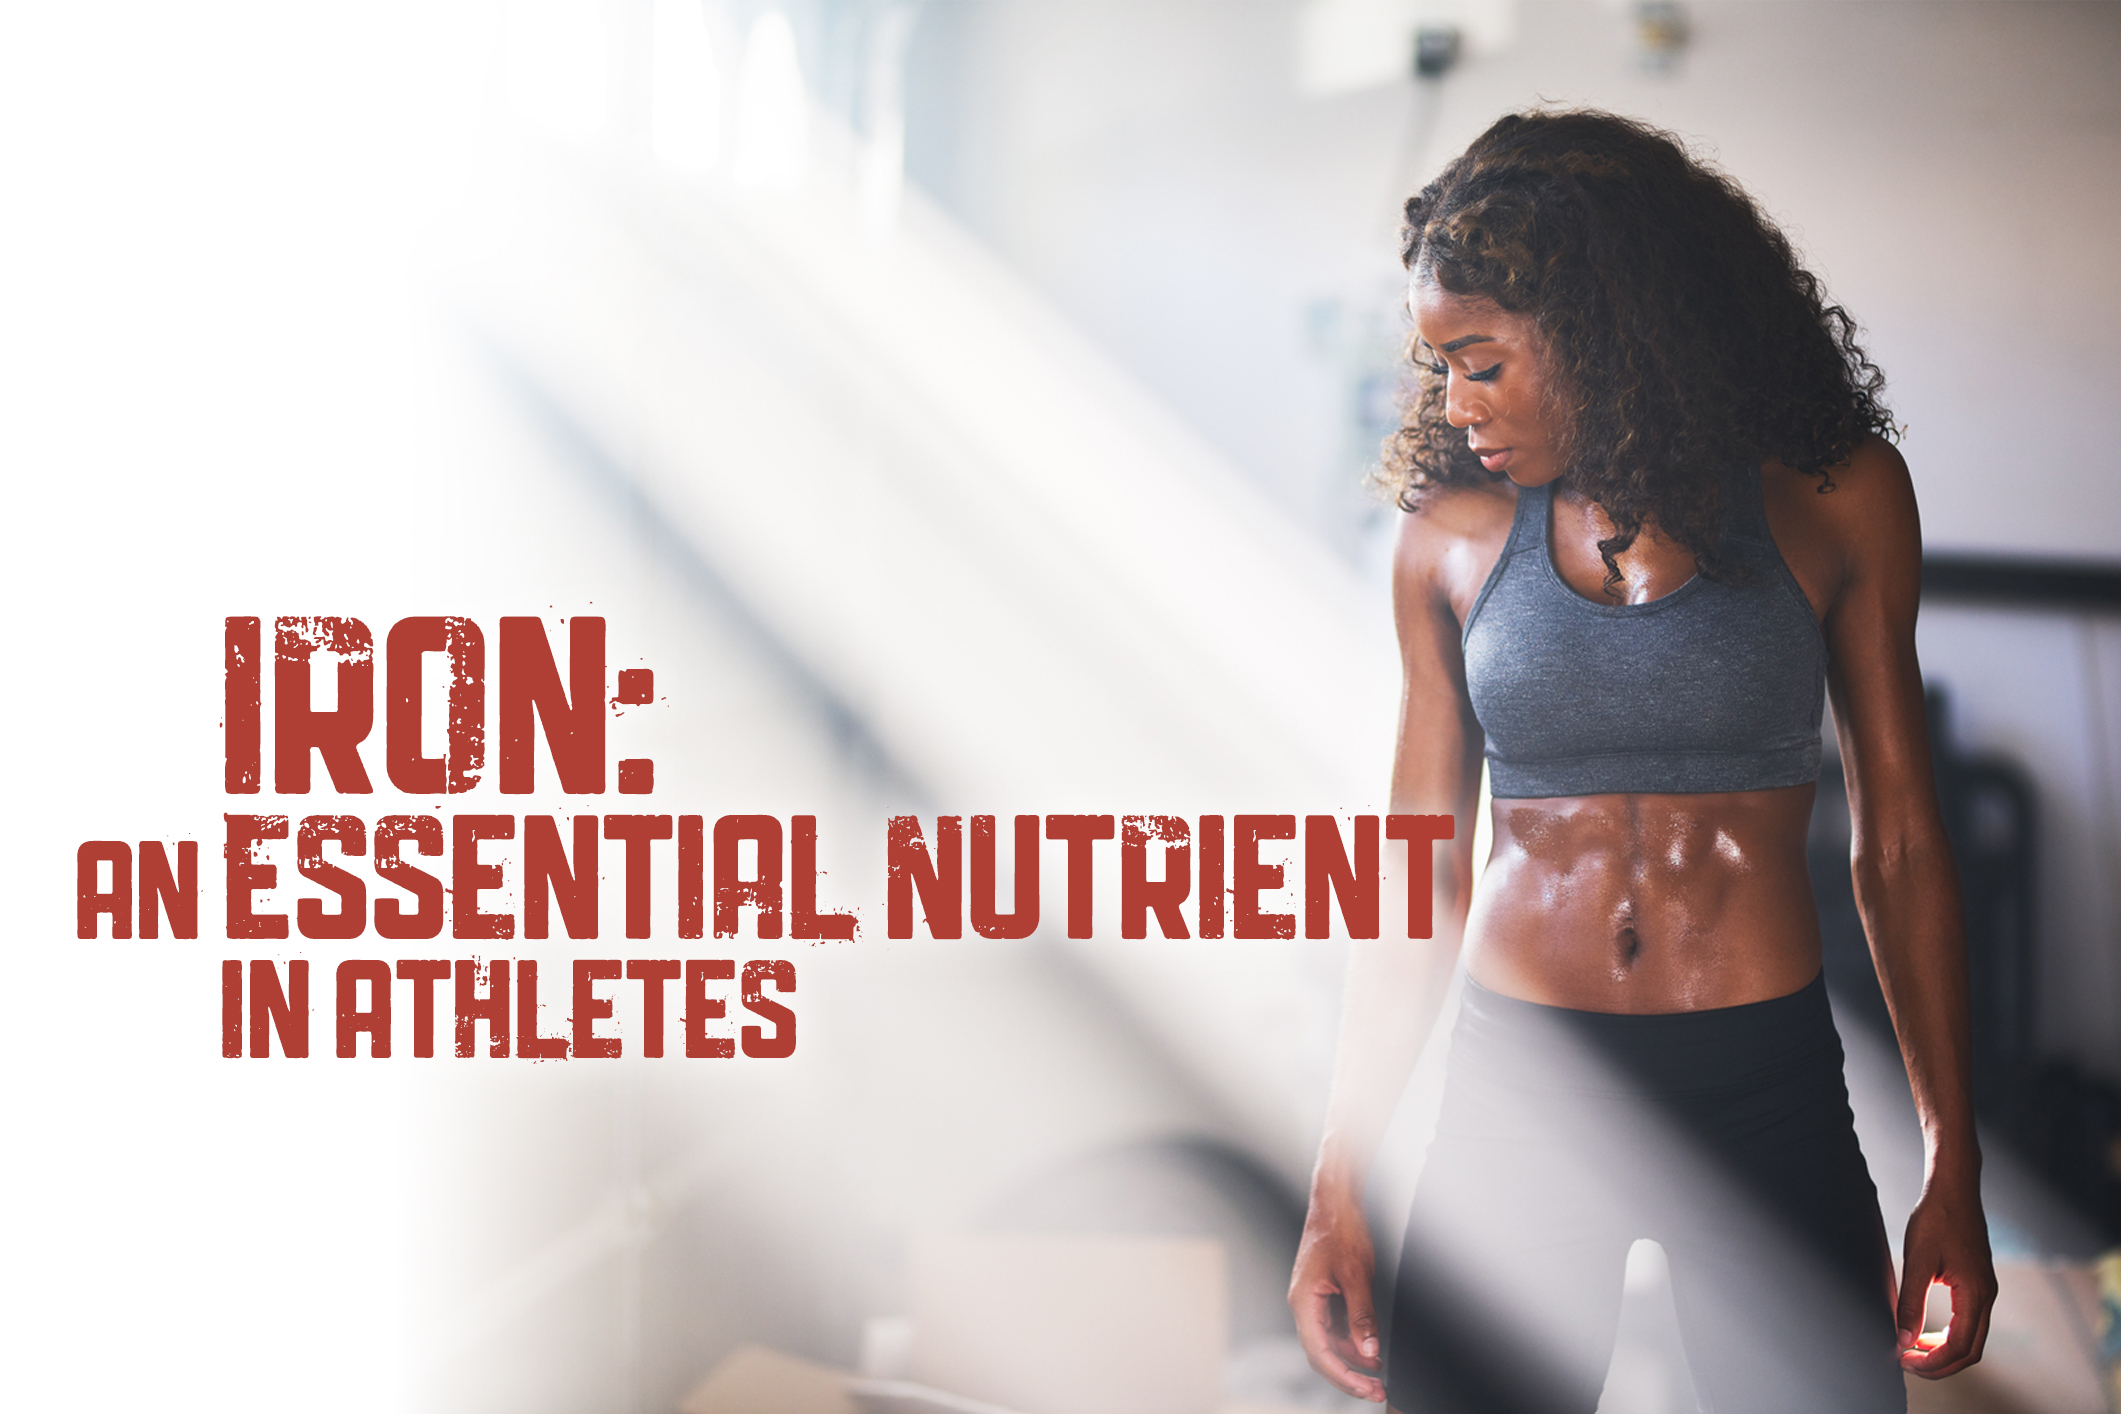 Iron:  An Essential Nutrient in Athletes